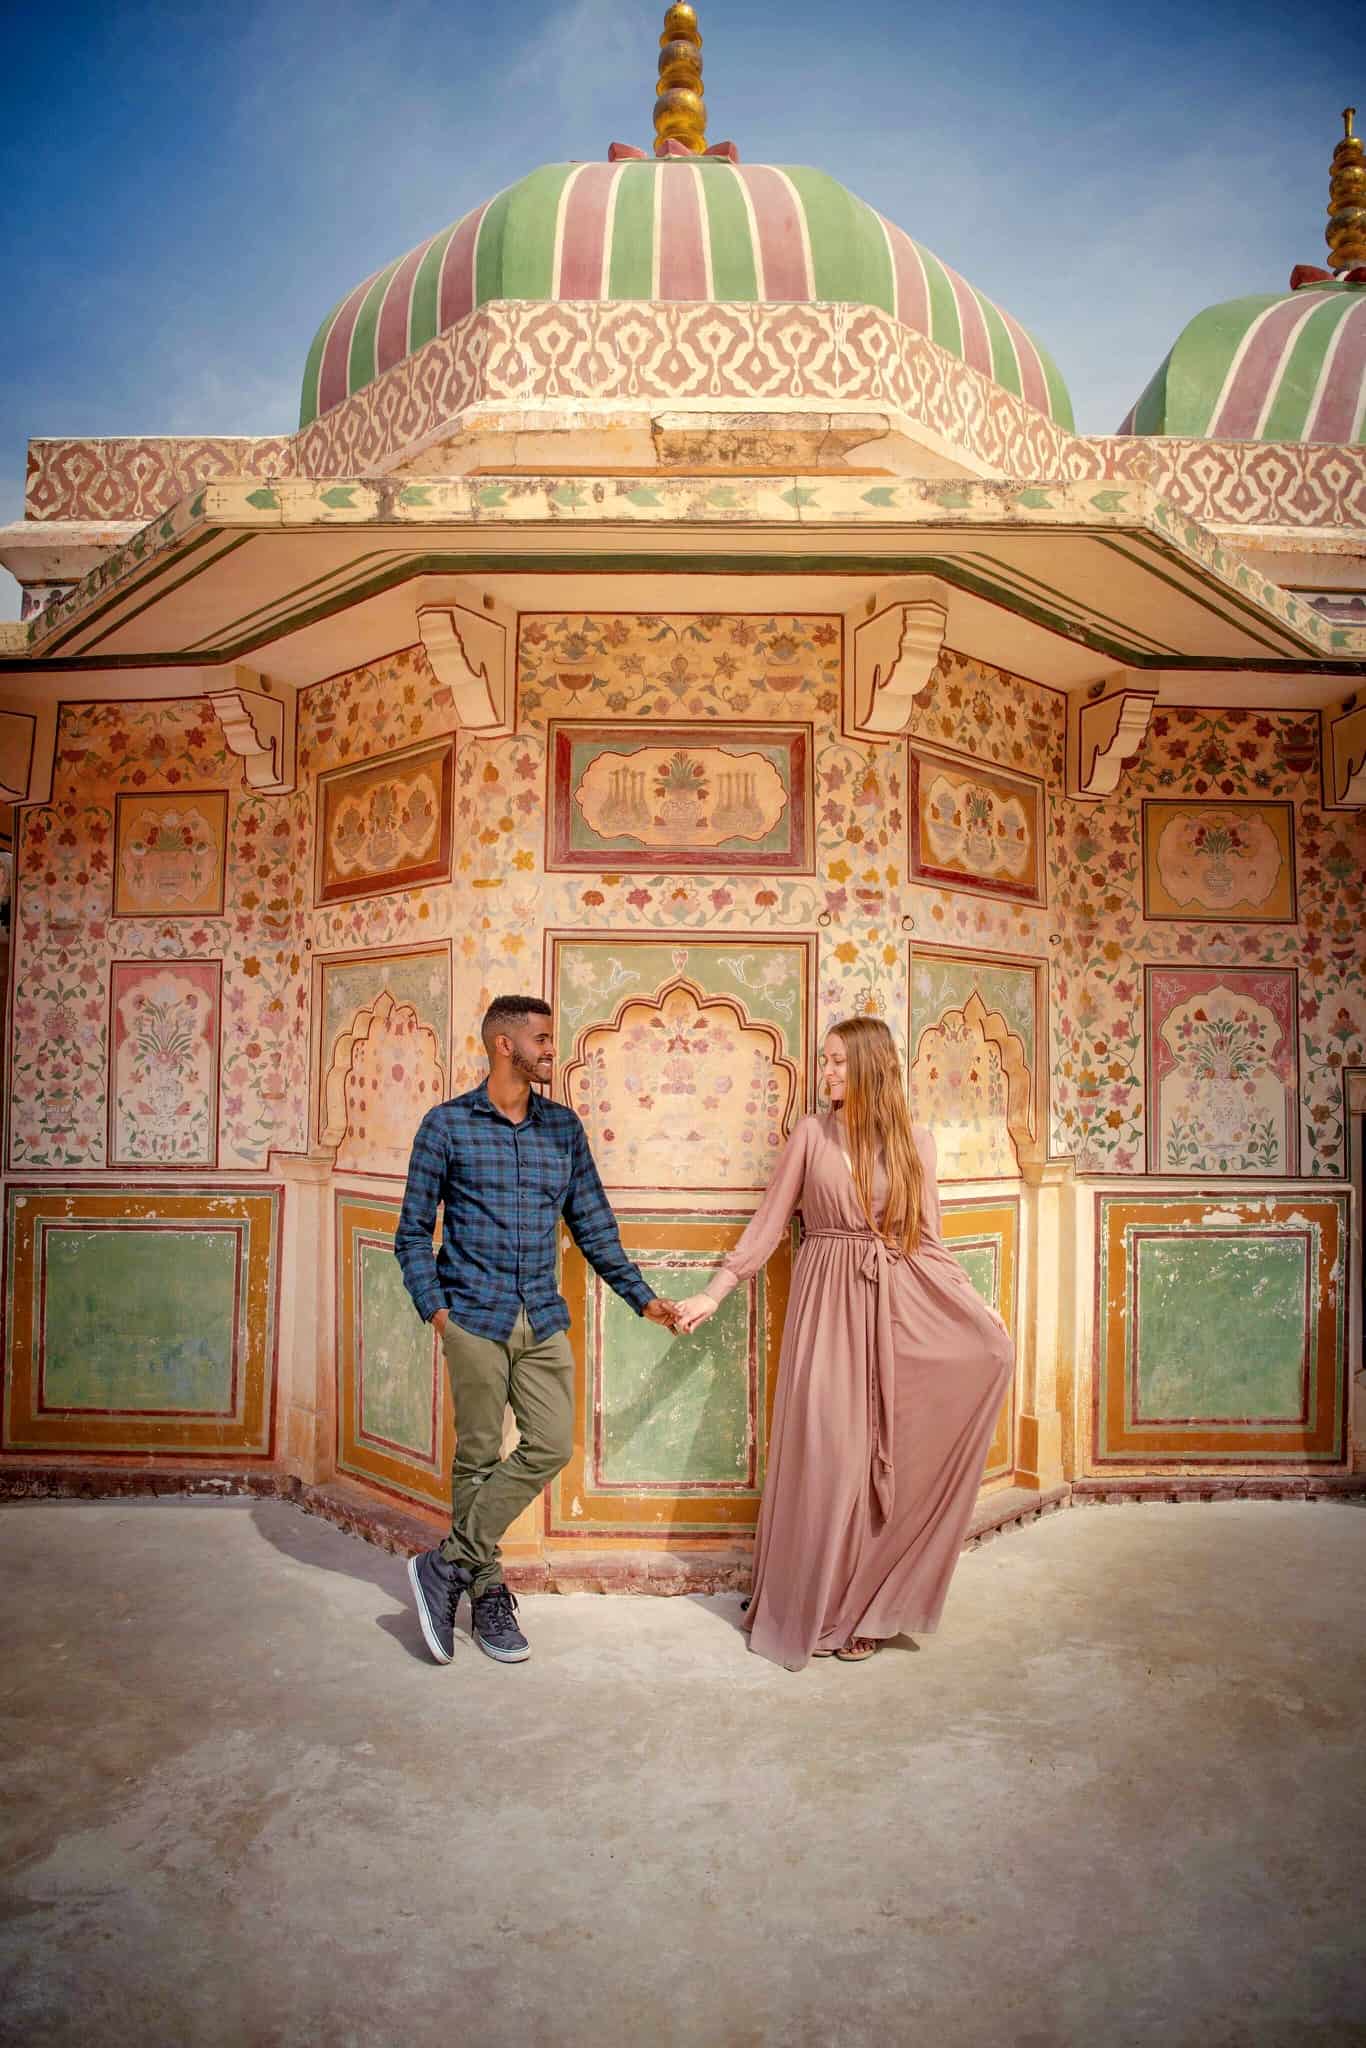 Amber fort in Jaipur | Photos in Jaipur | couples photography in India | india travel tips